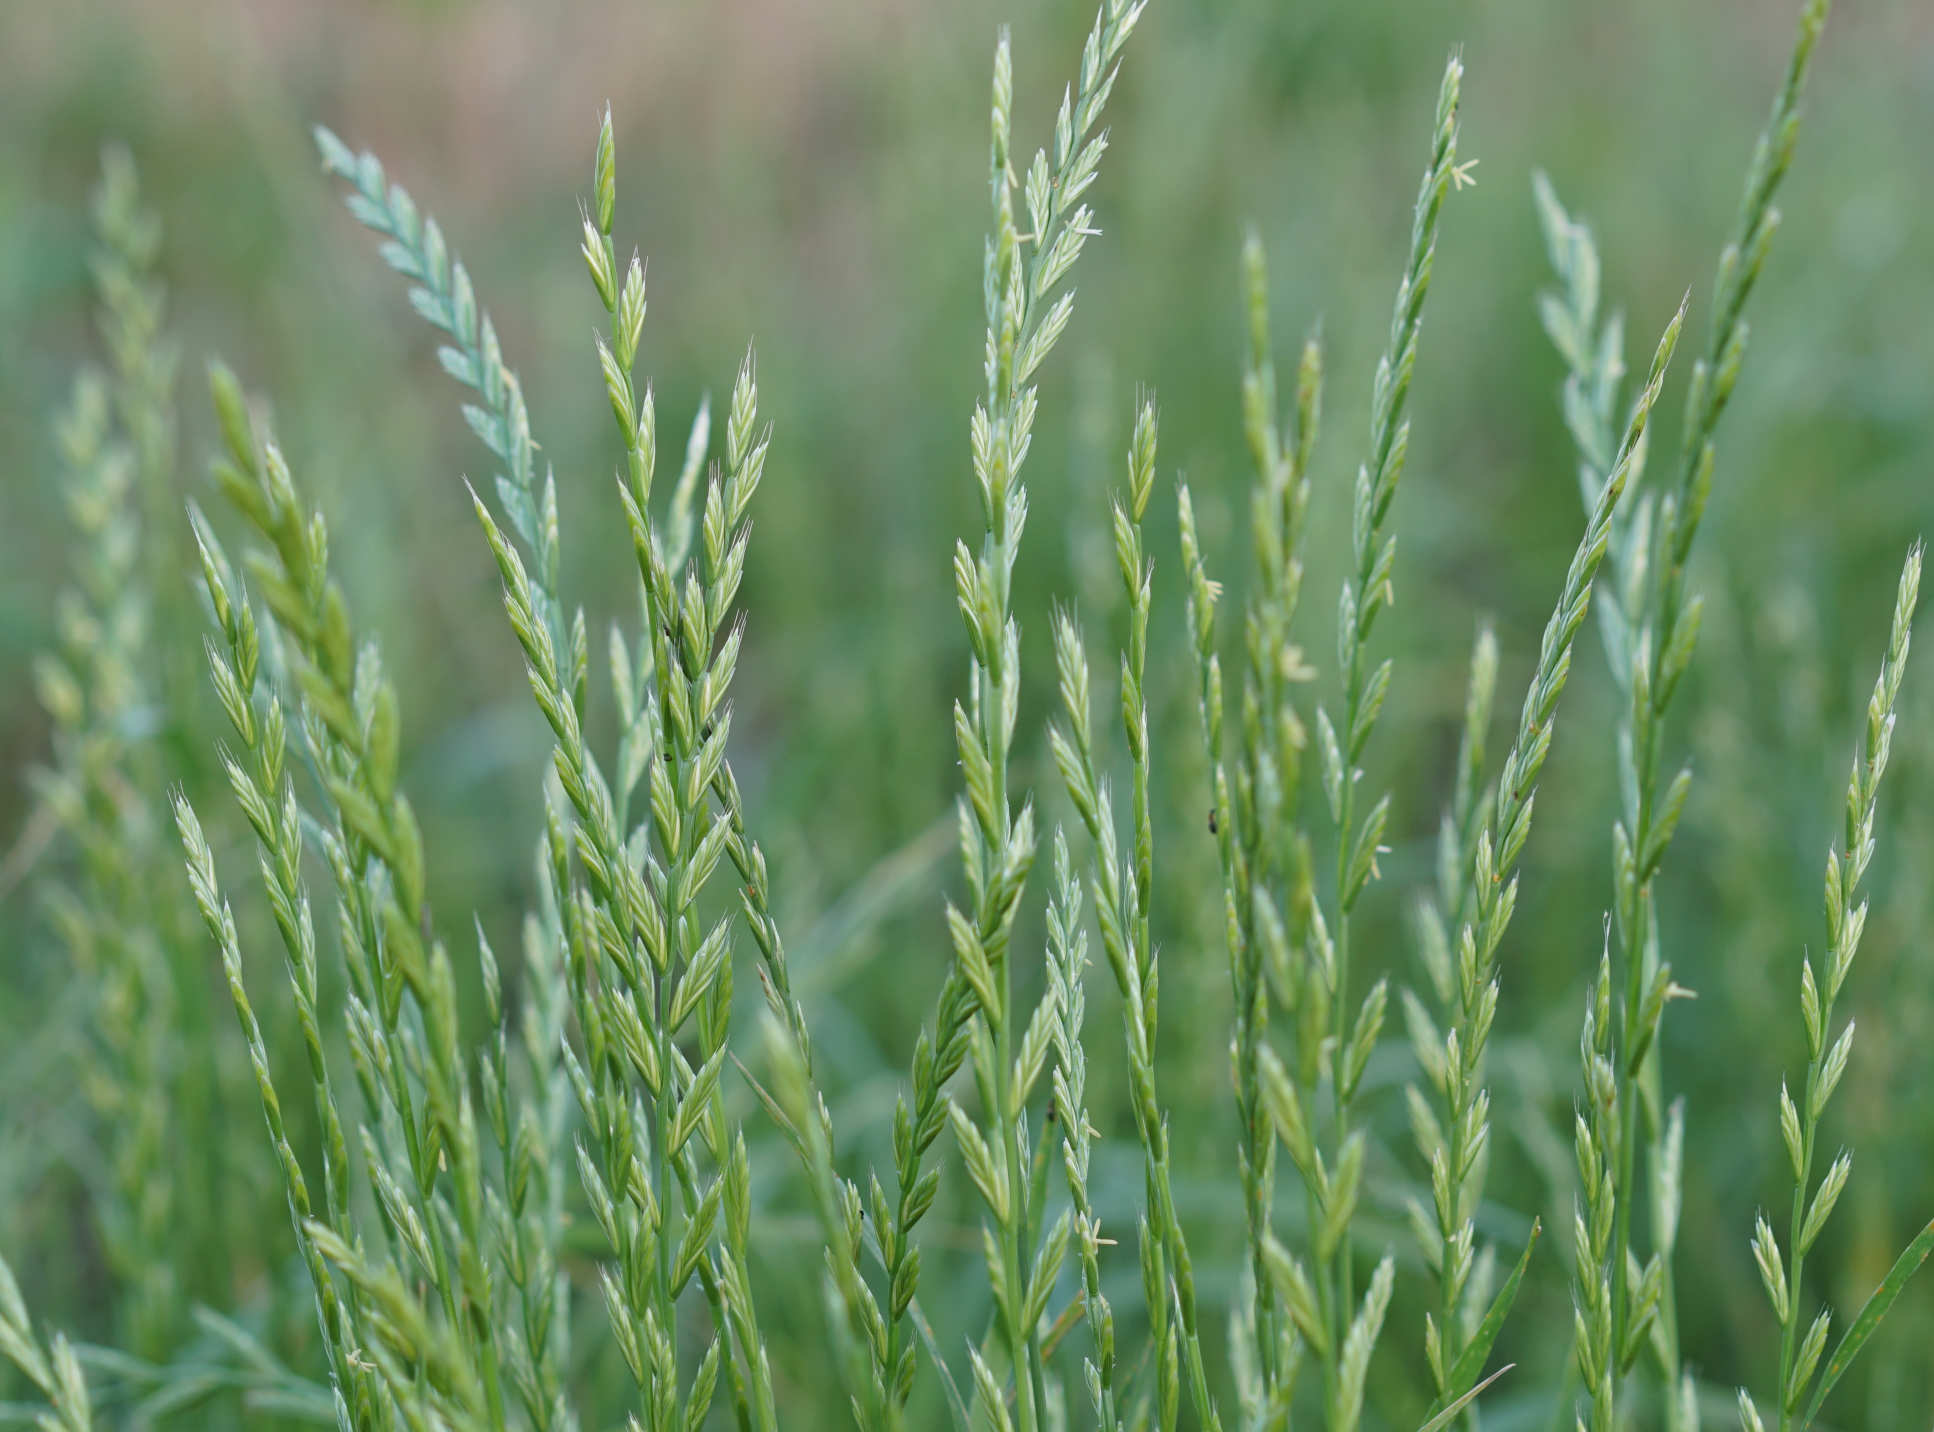 Researchers are developing immunotherapy treatments from protein fragments, or peptides, from rye grass (Lolium perenne). Image: Shutterstock / Doikanoi